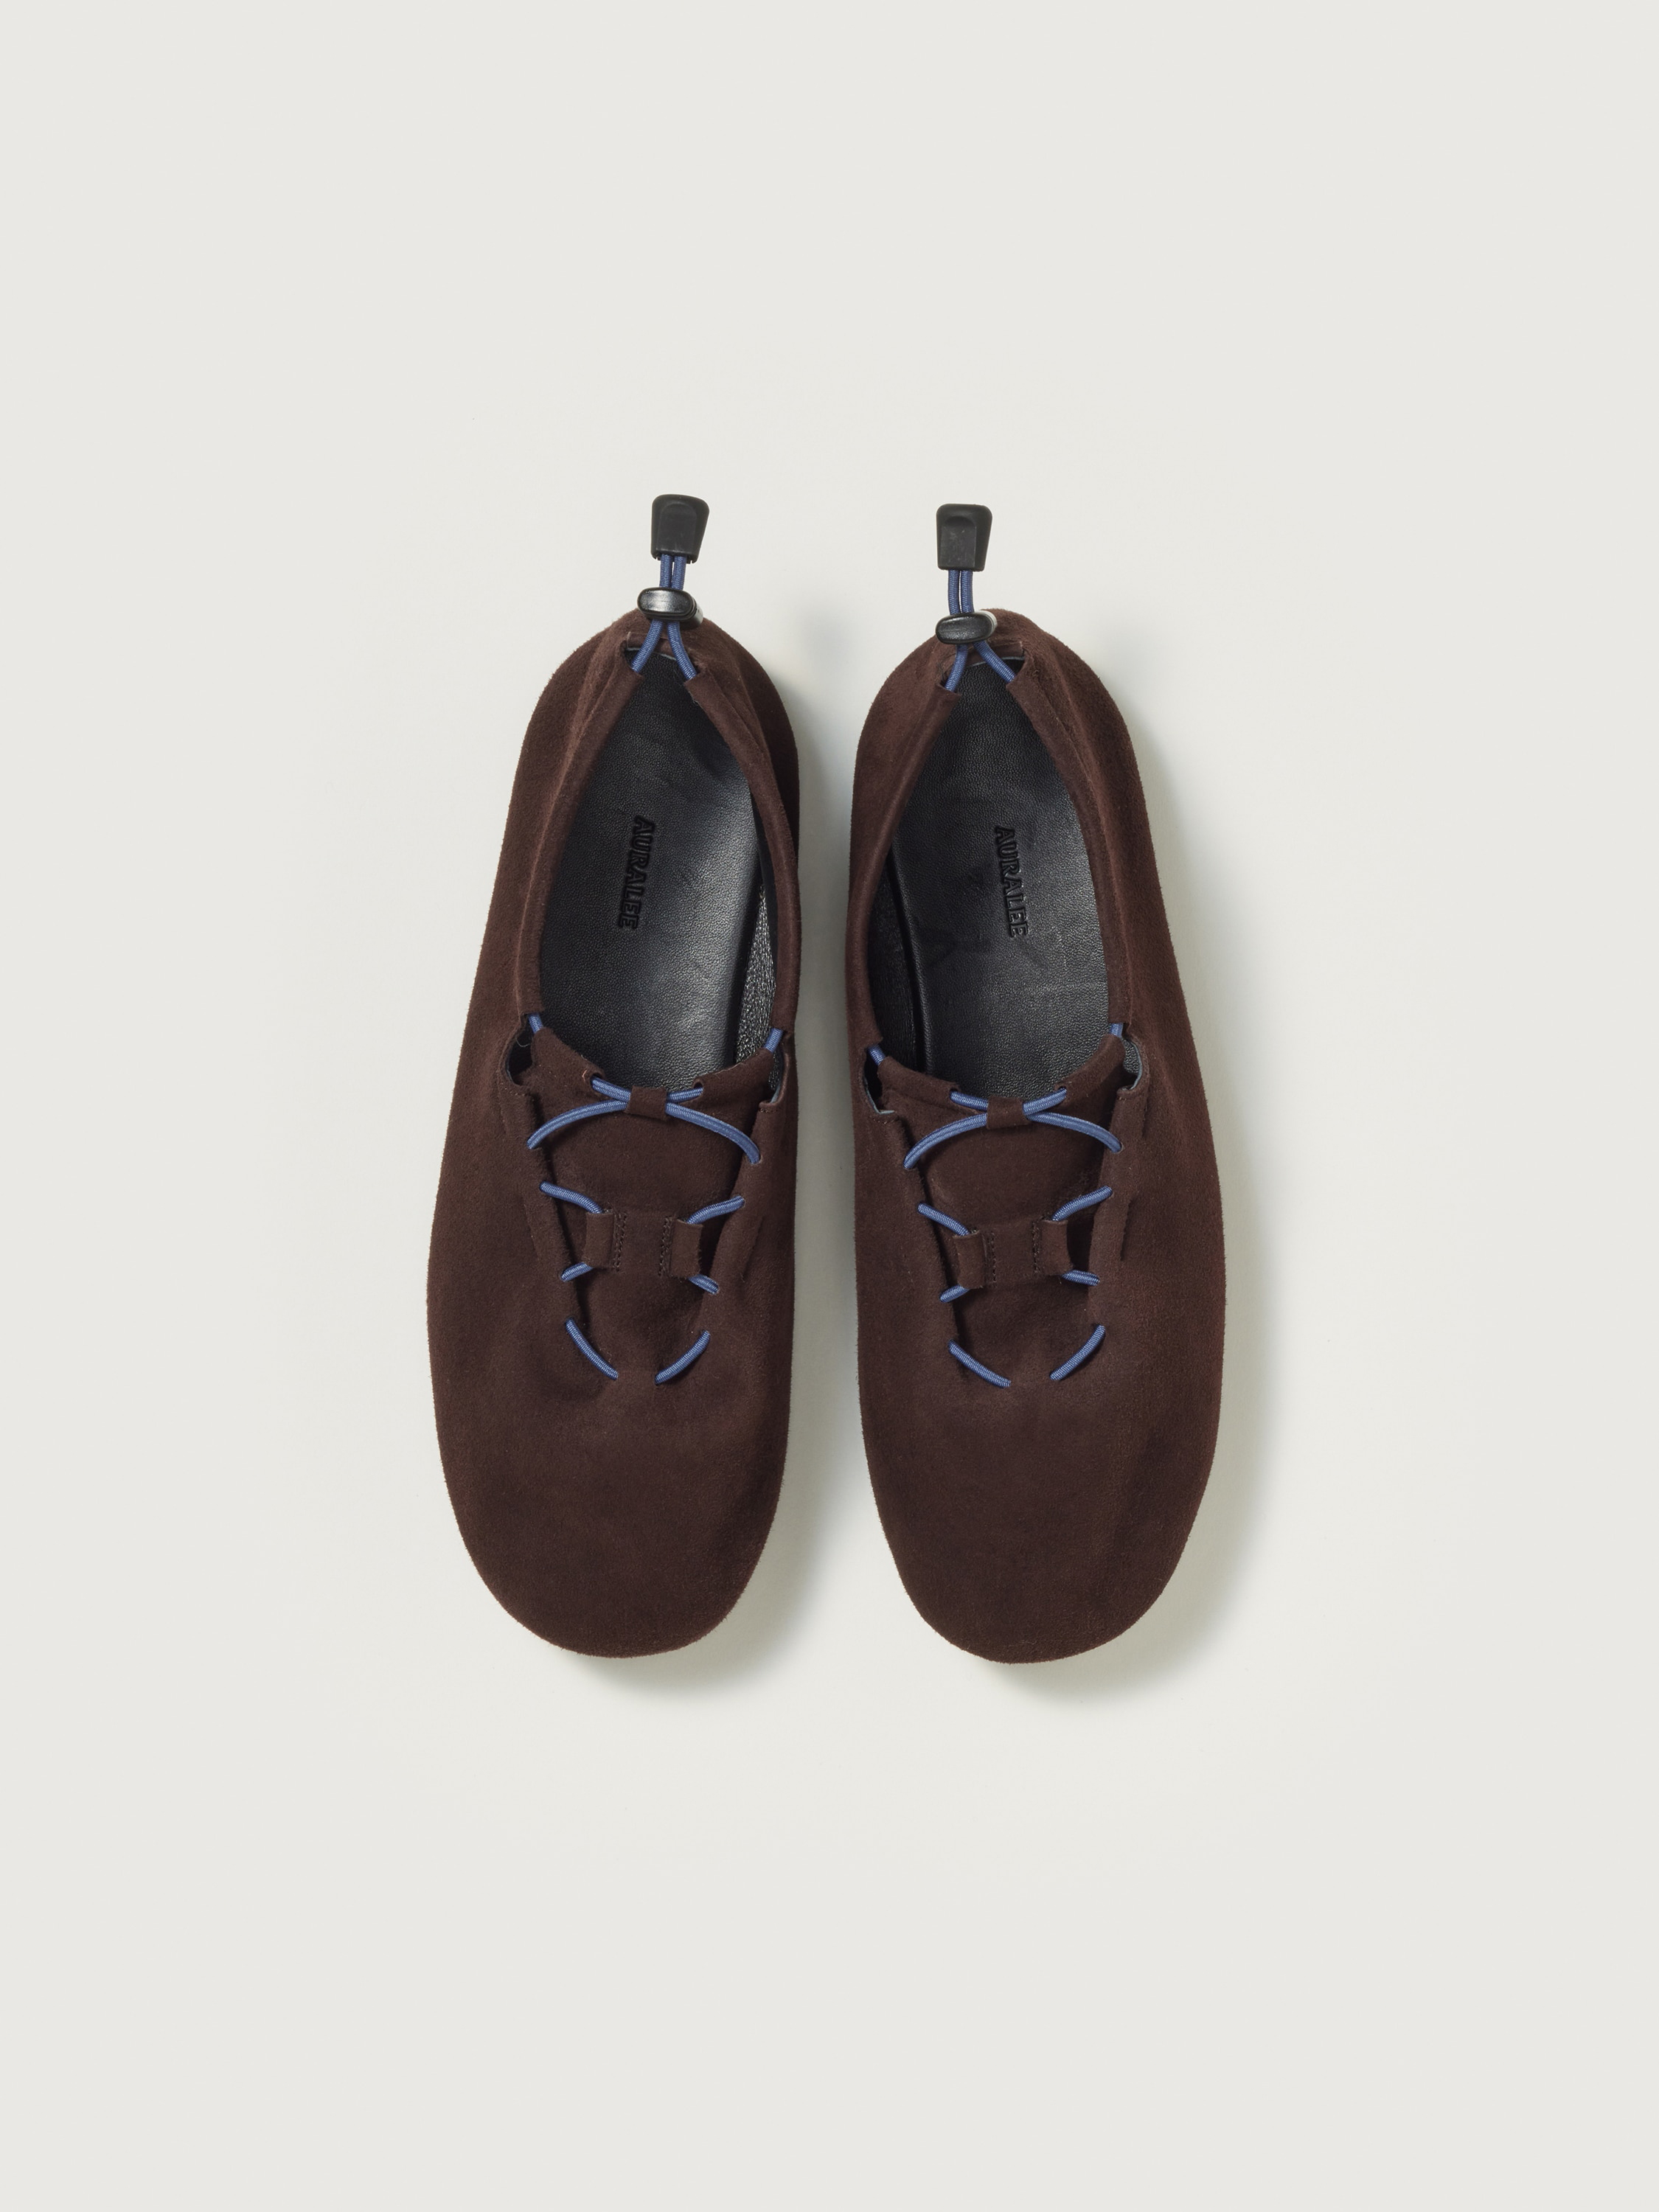 LAMB SUEDE CORD SHOES MADE BY FOOT THE COACHER 詳細画像 DARK BROWN 4